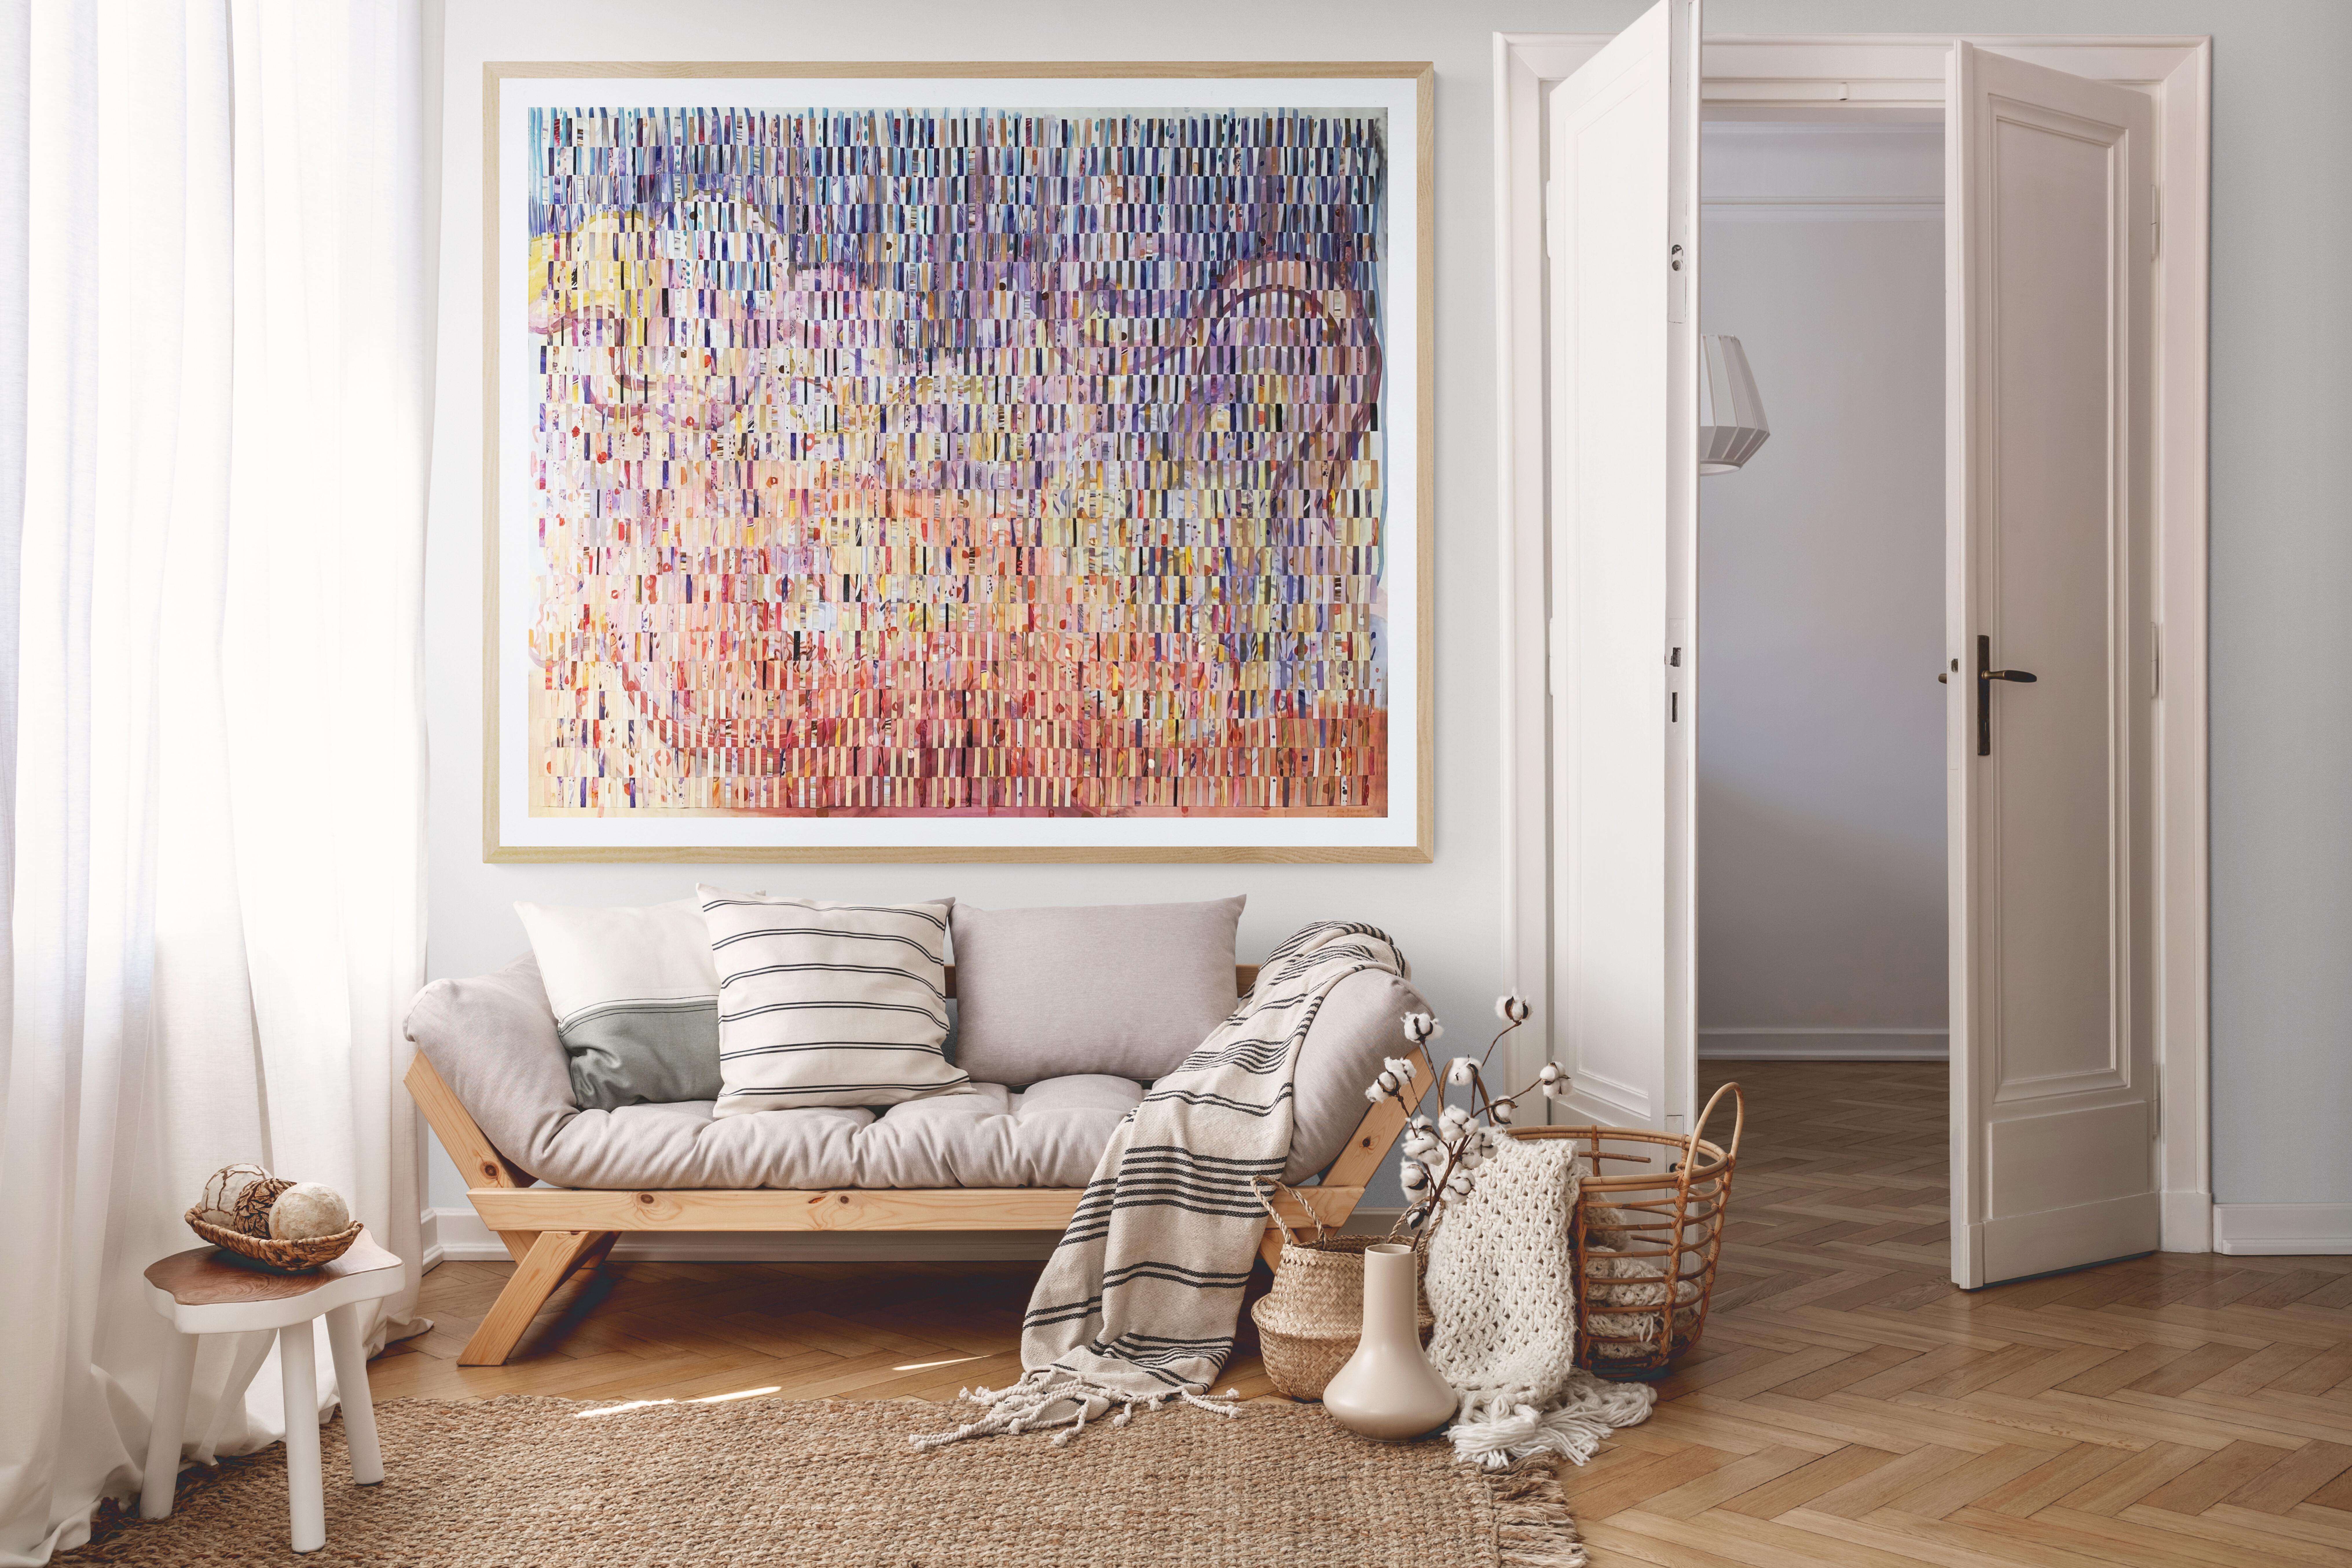 This unique artwork is created through interweaving strips of painted fabriano paper in order to create a complex composition with depth and texture. The artwork is framed and floated to the backboard. The dimensions of 125 x 150 cm are that of the